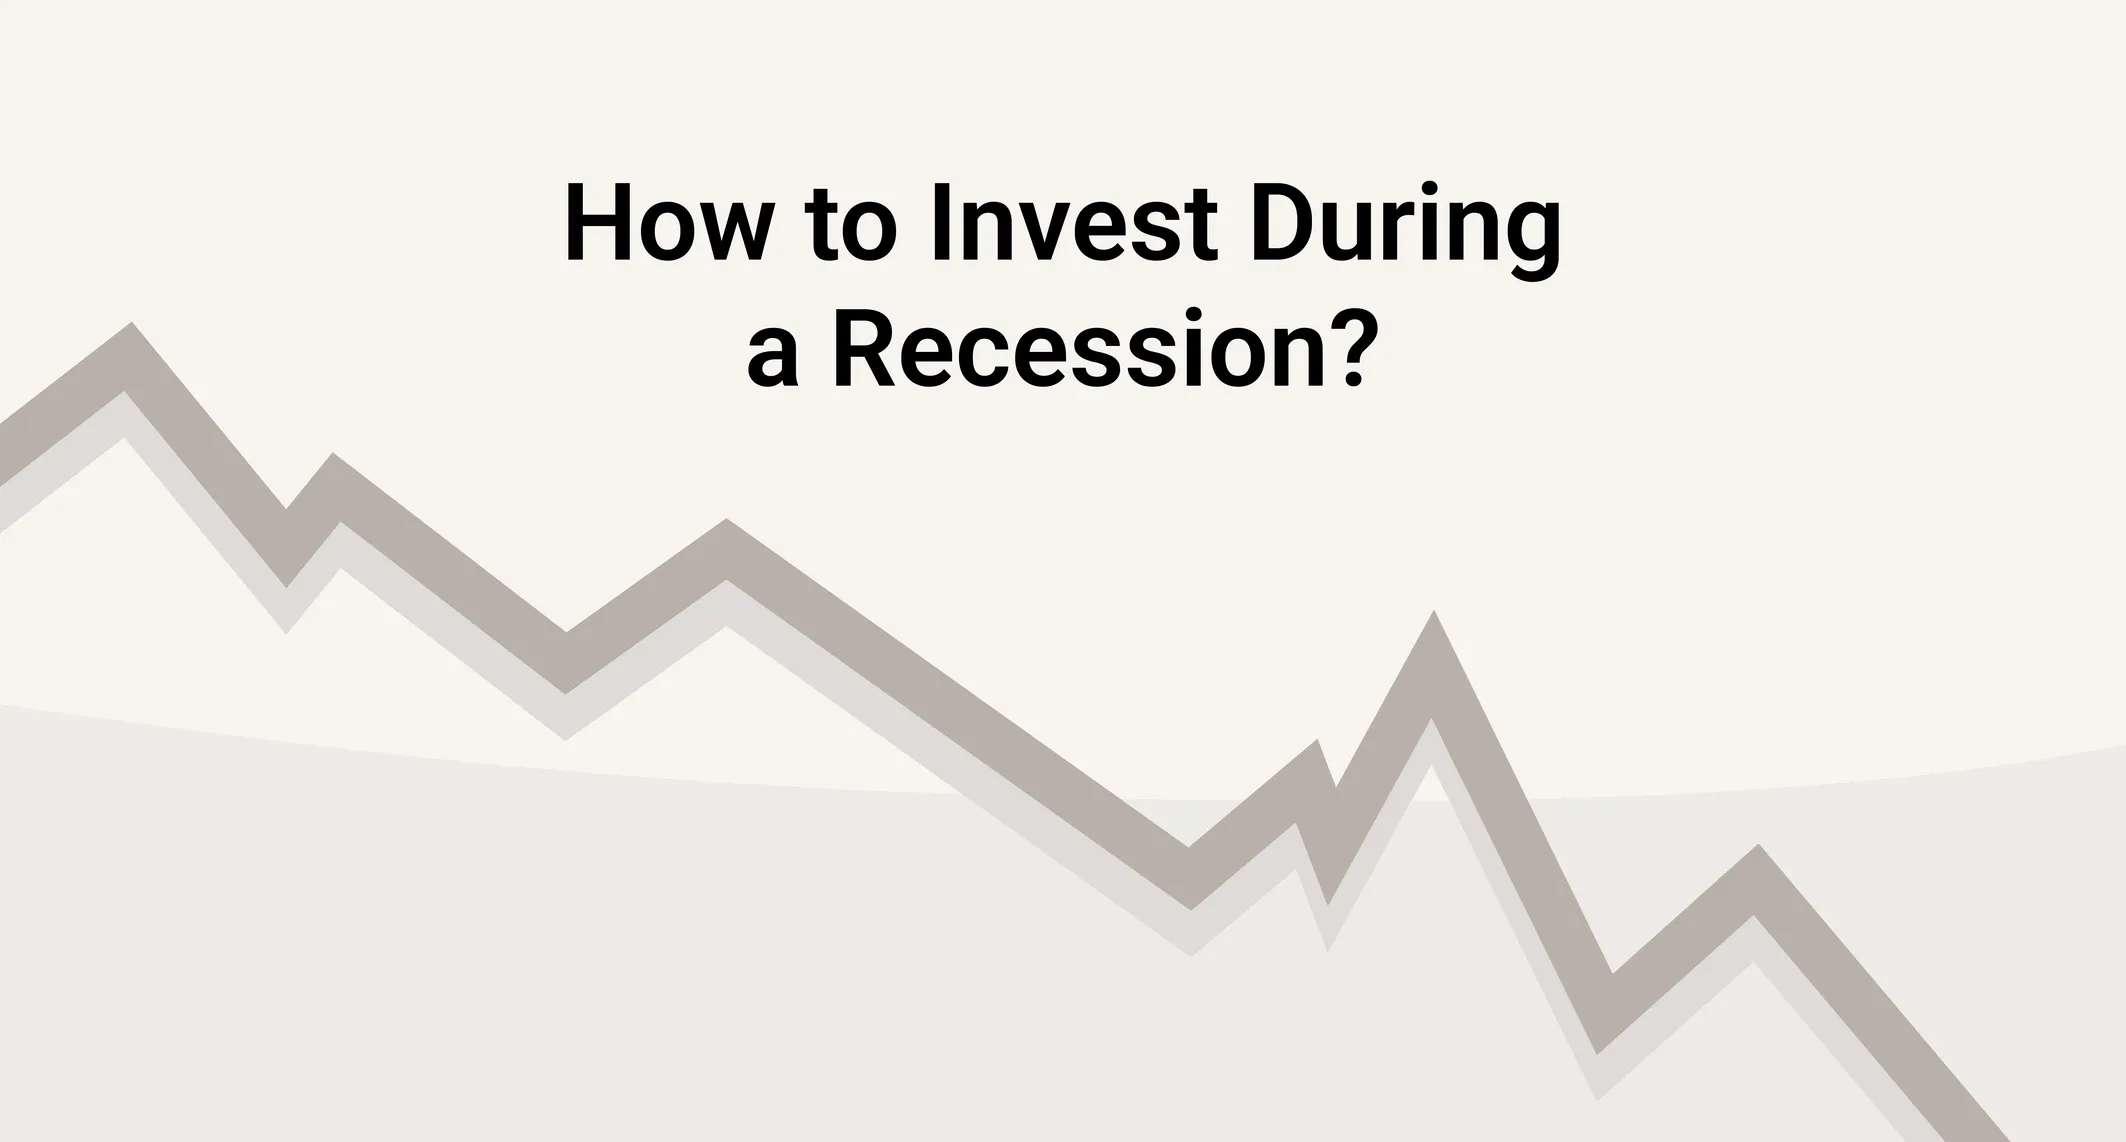 How to Invest During a Recession?